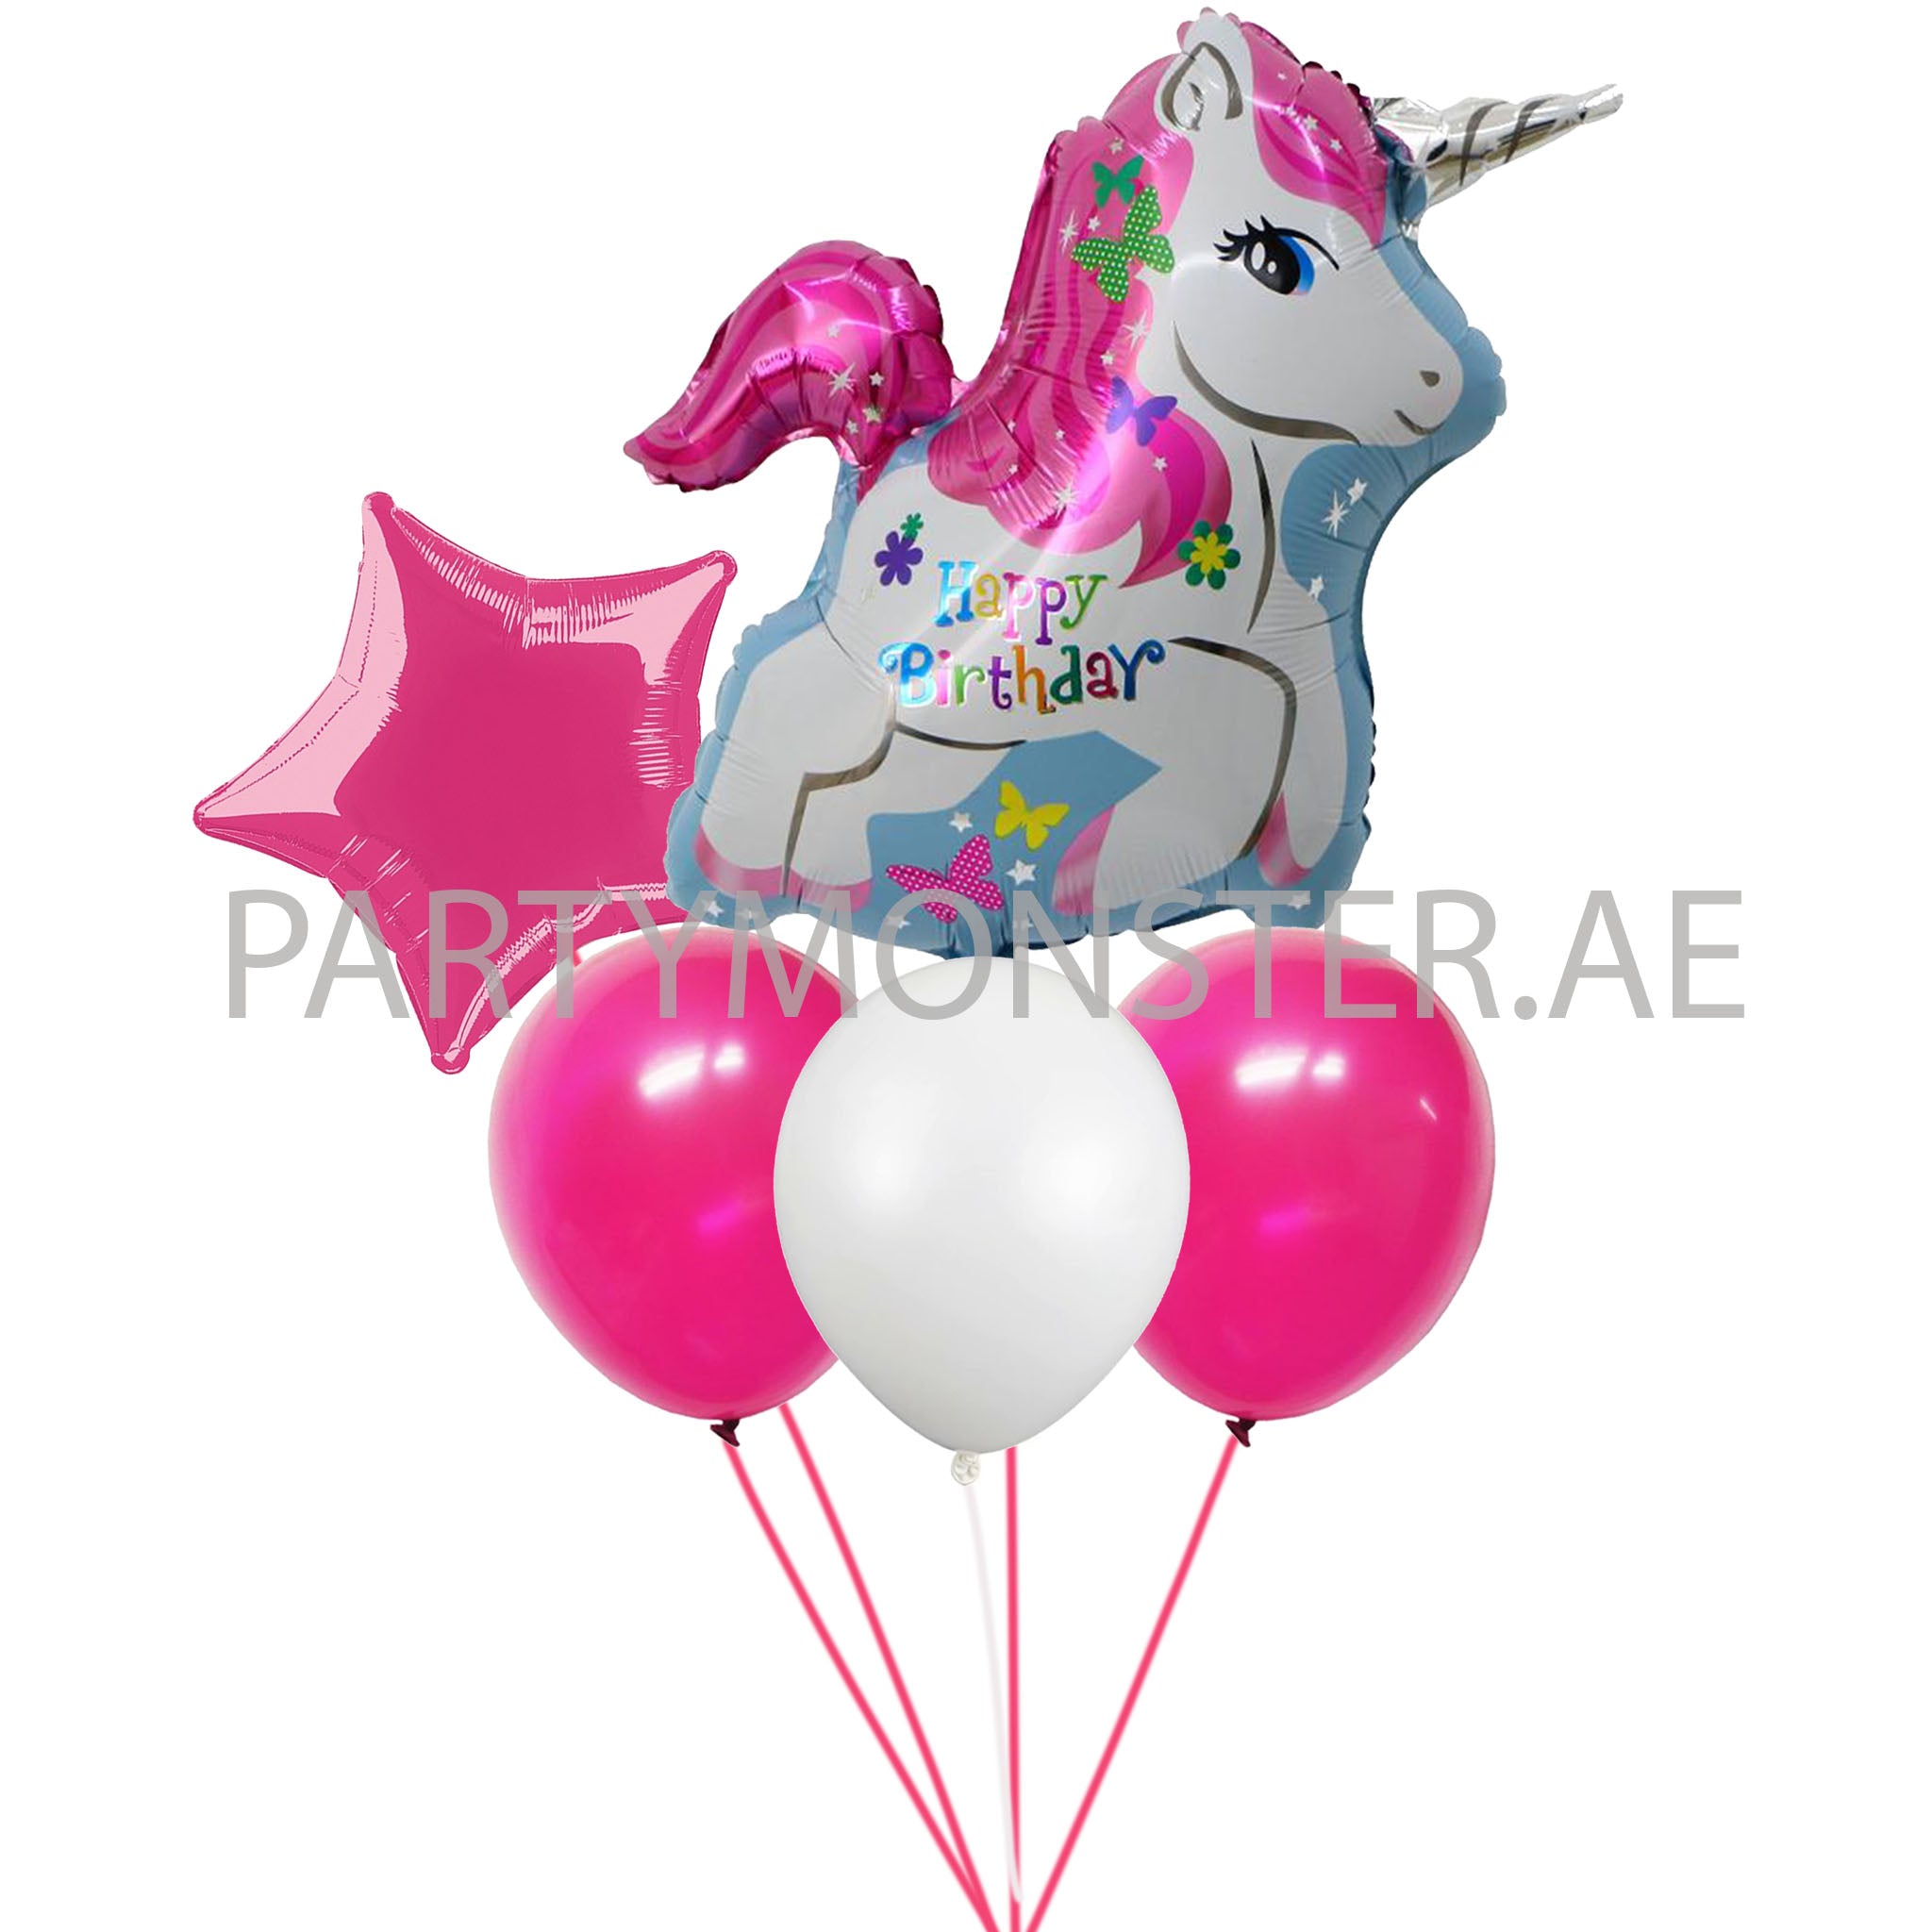 Unicorn birthday foil and latex balloons bouquet - PartyMonster.ae